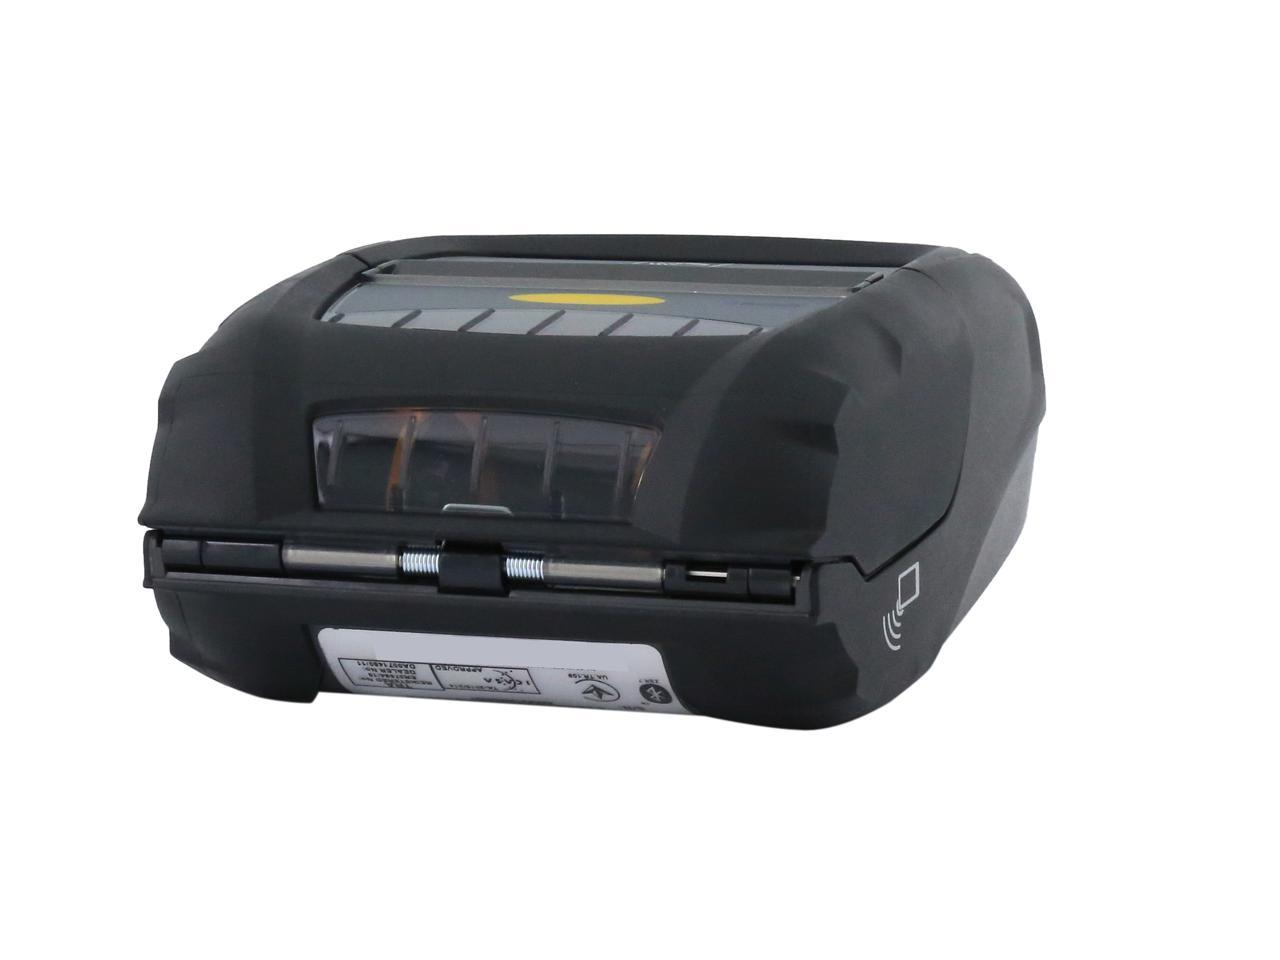 Zebra Zq510 3 Mobile Direct Thermal Receipt And Label Printer 203 Dpi Bluetooth 40 Linered 1113